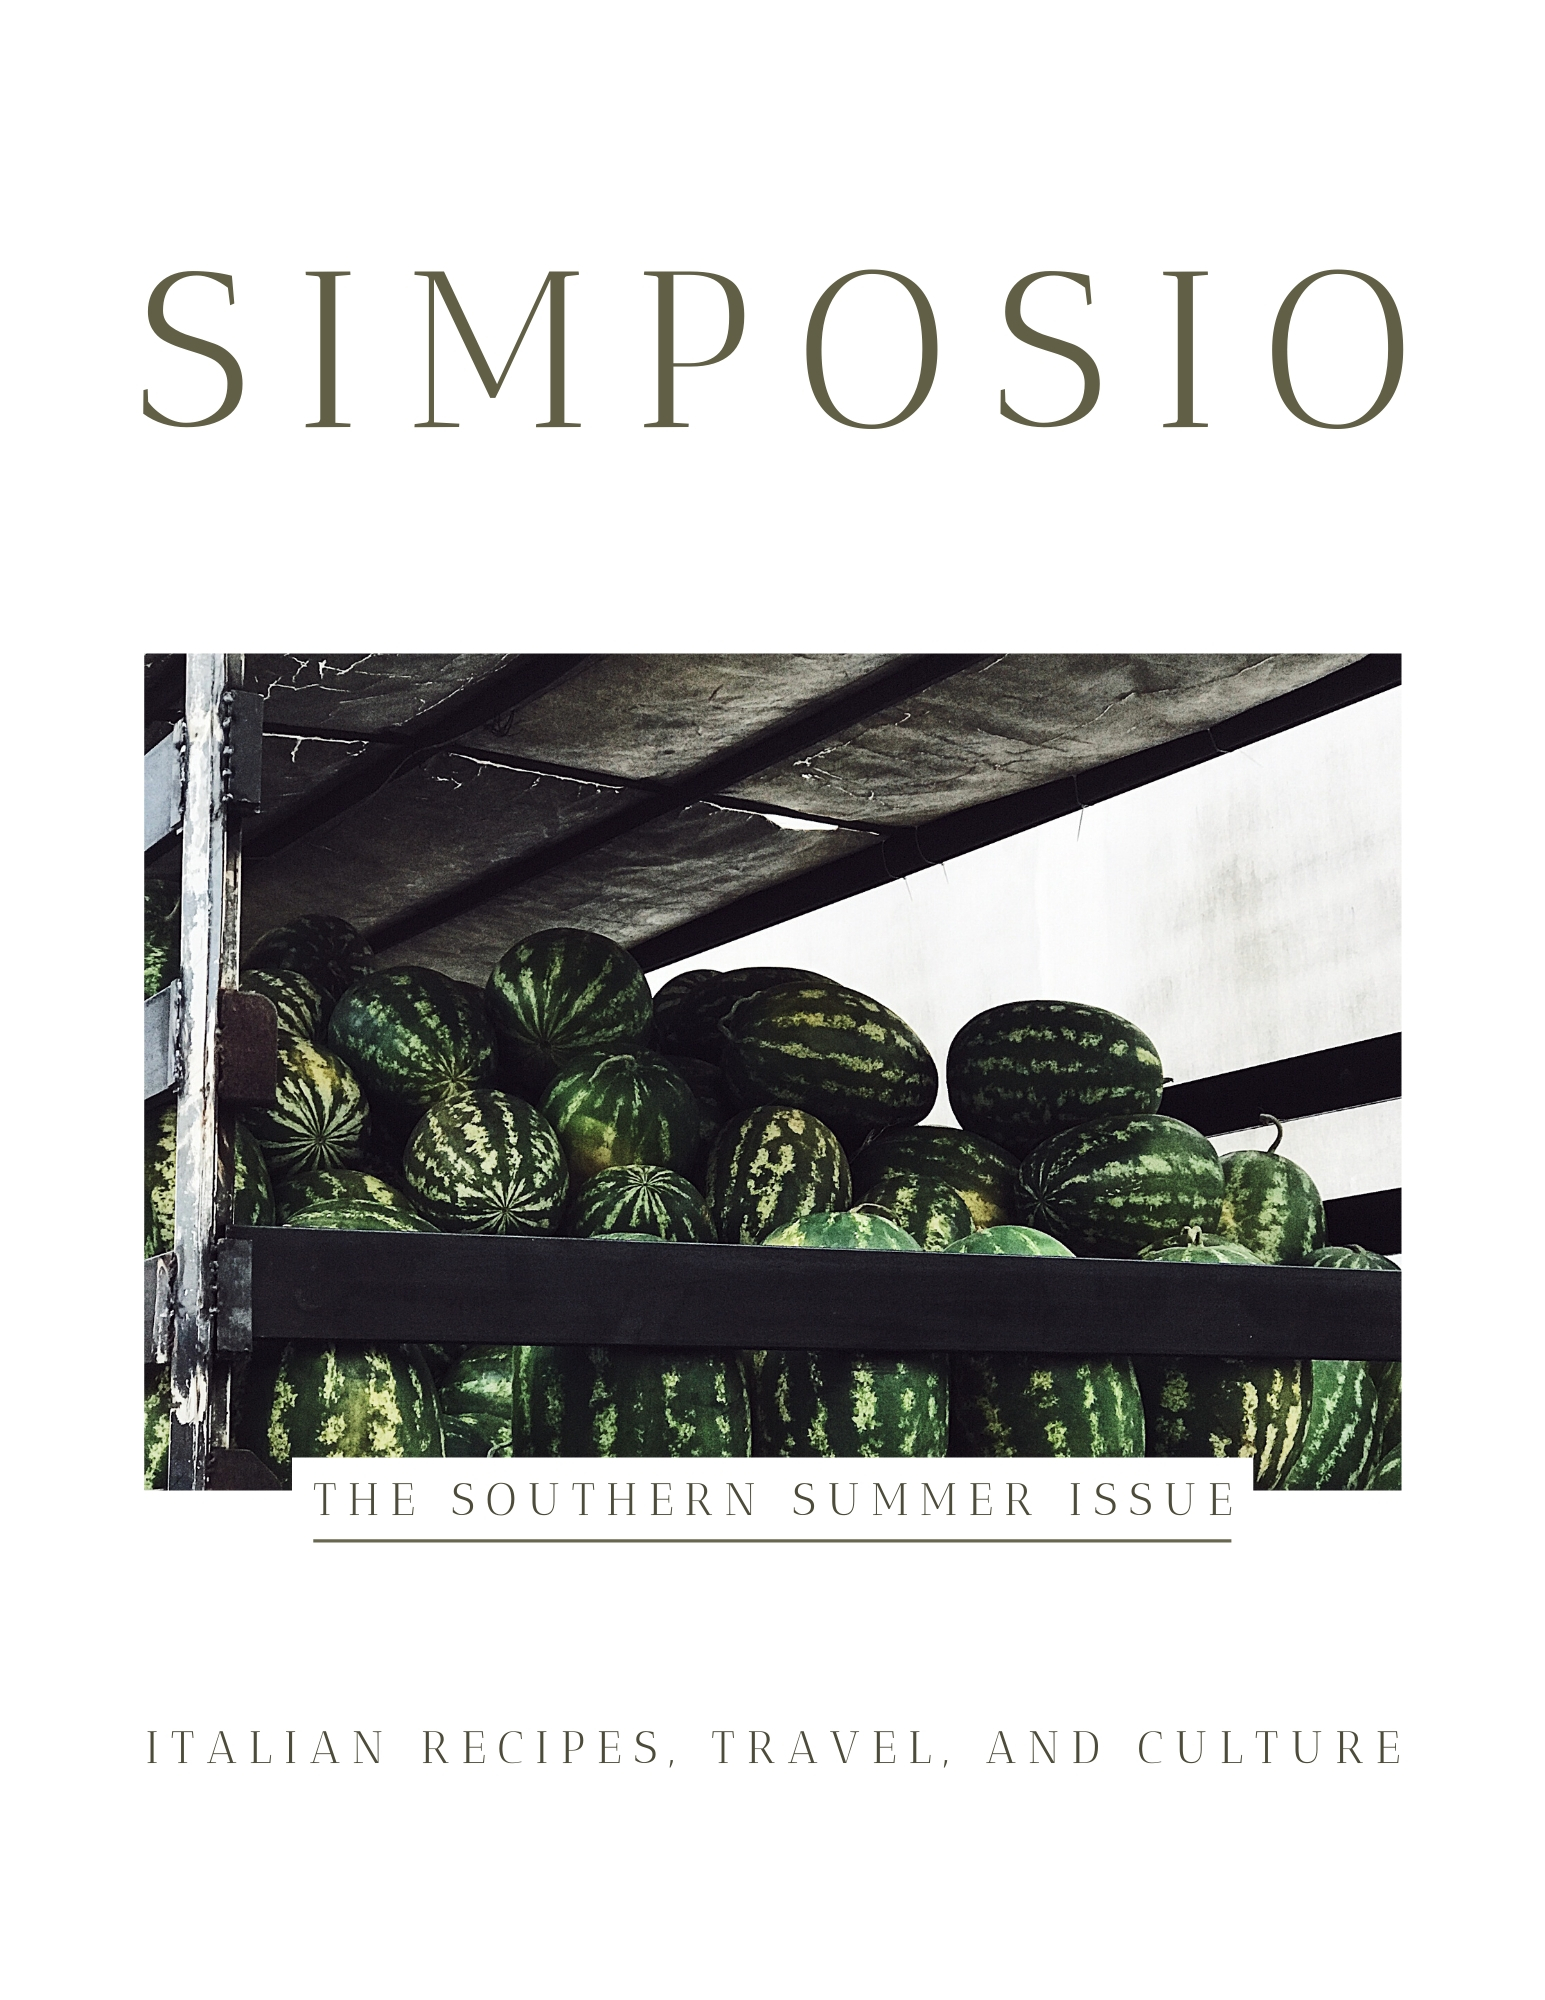 cover of the Summer cookbook from the Italian series of Simposio